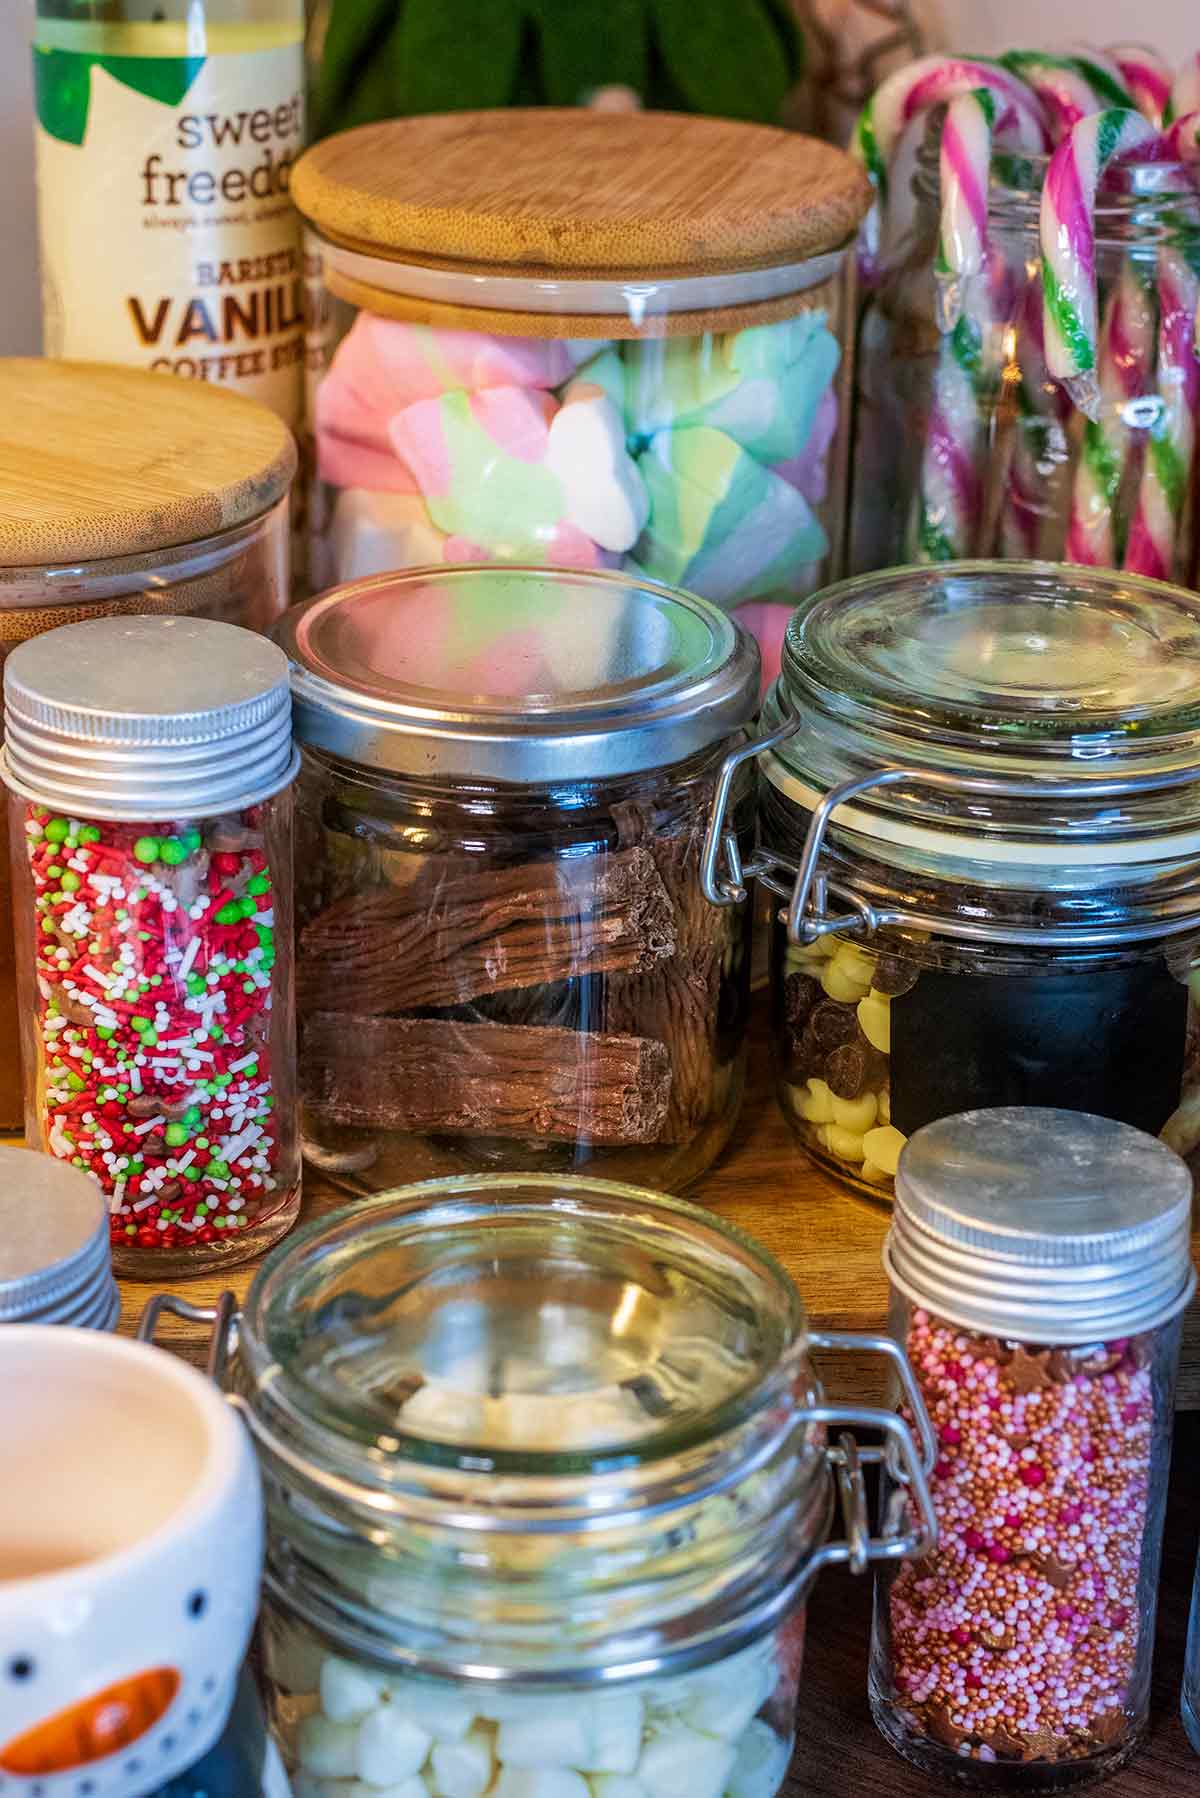 Jar of Christmas shaped marshmallows next to a jar of chocolate flakes.